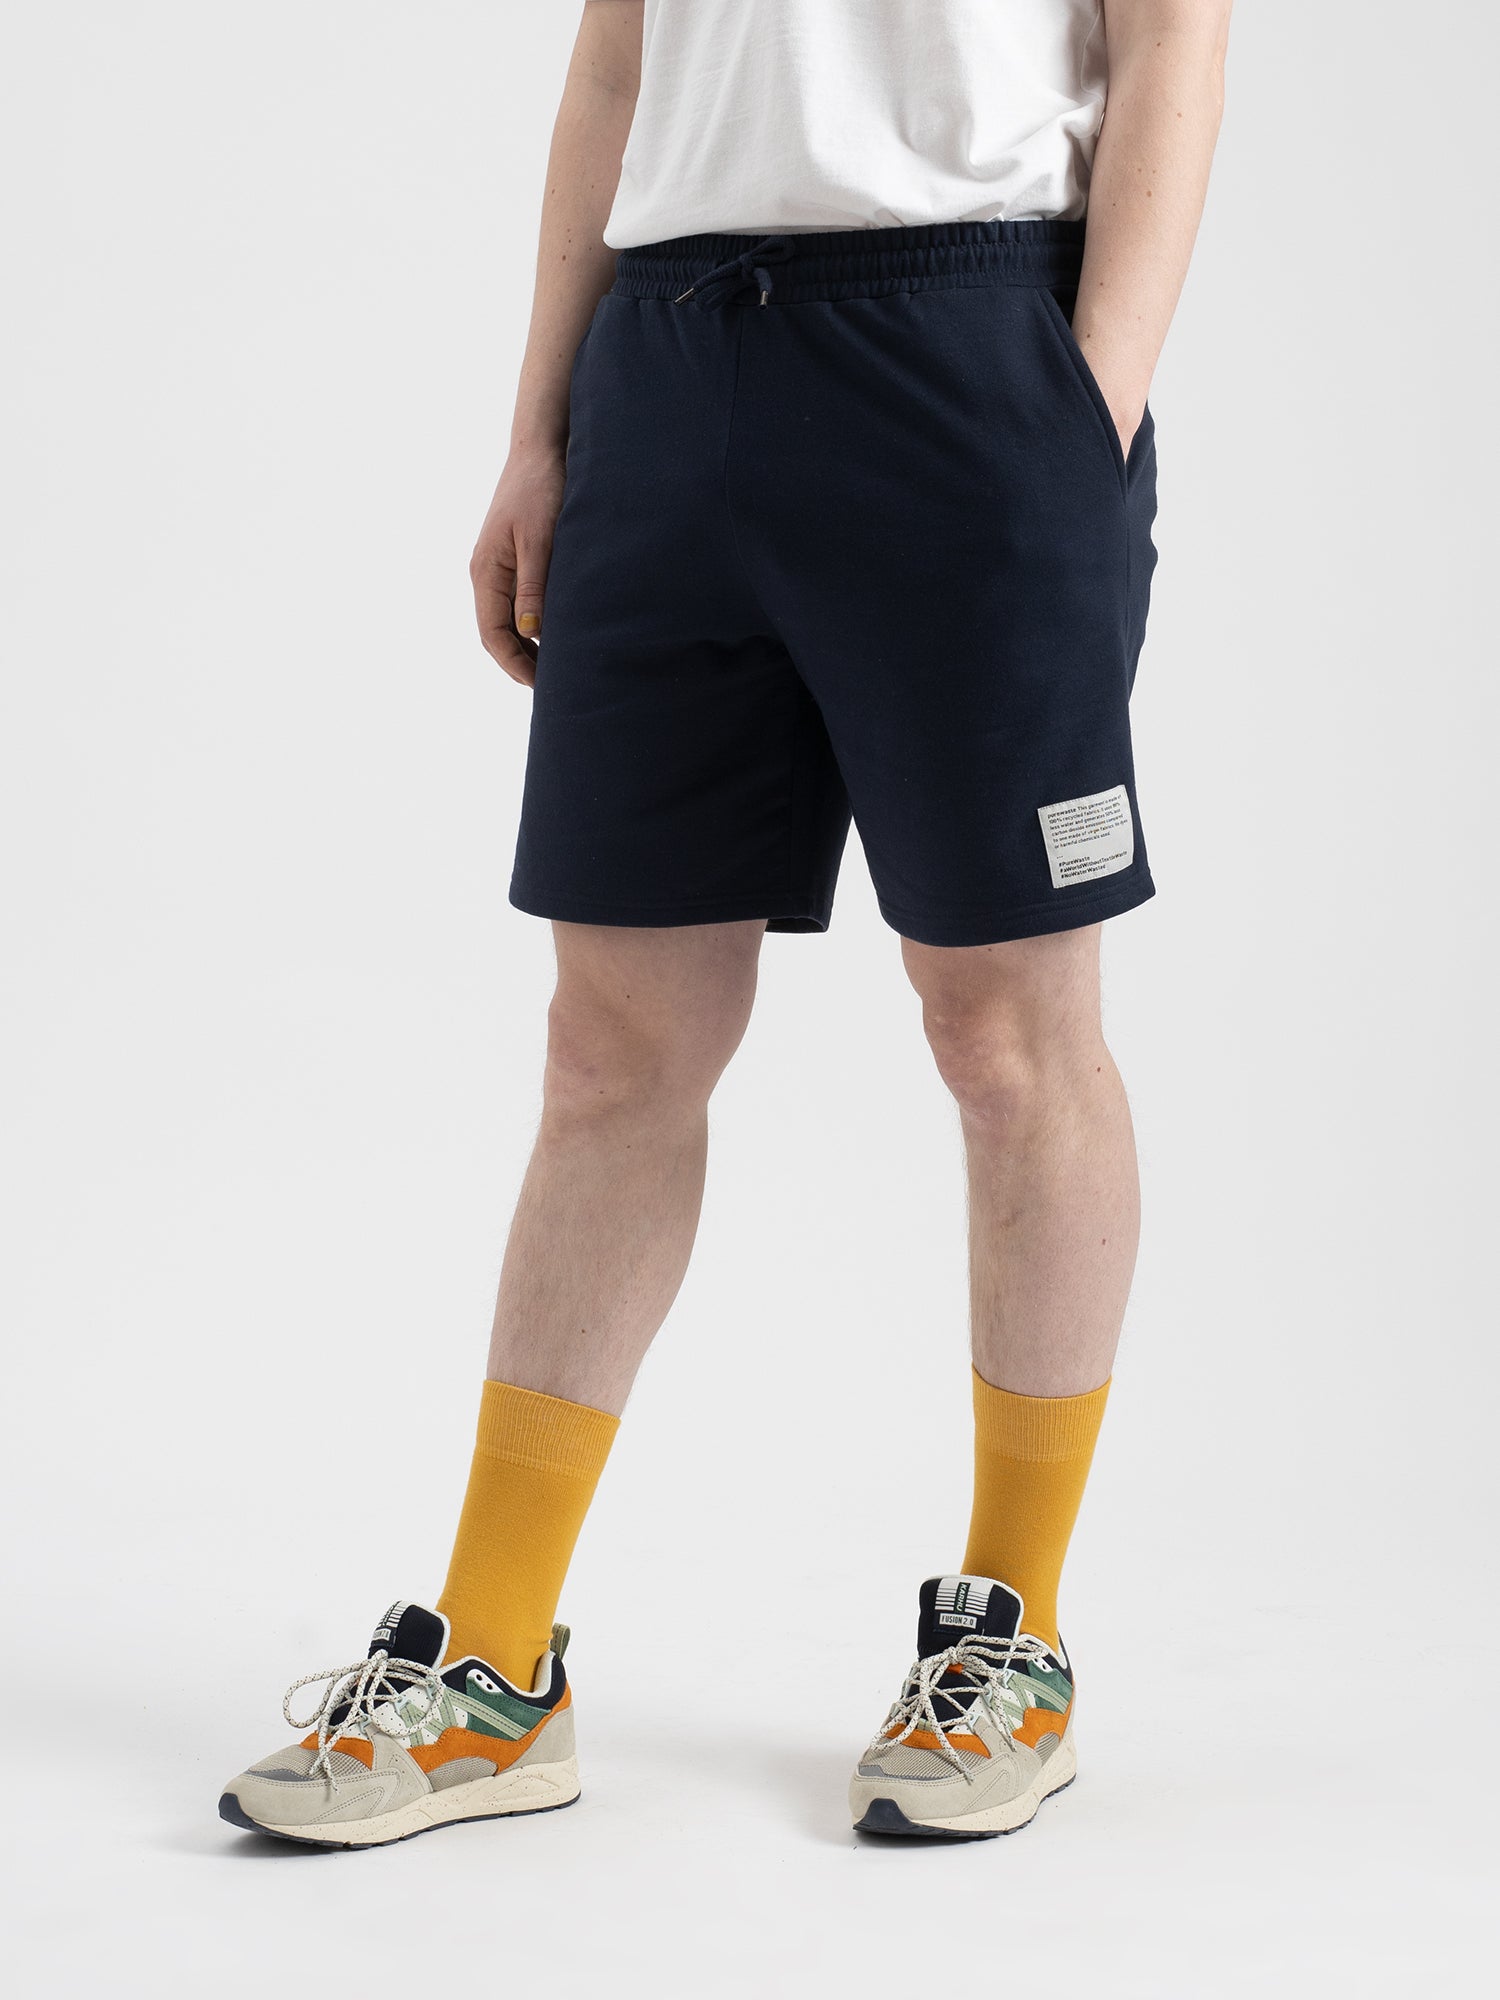 Pure Waste Unisex Loose Fit Sweatshorts - Recycled cotton & Recycled polyester Solid Navy Pants